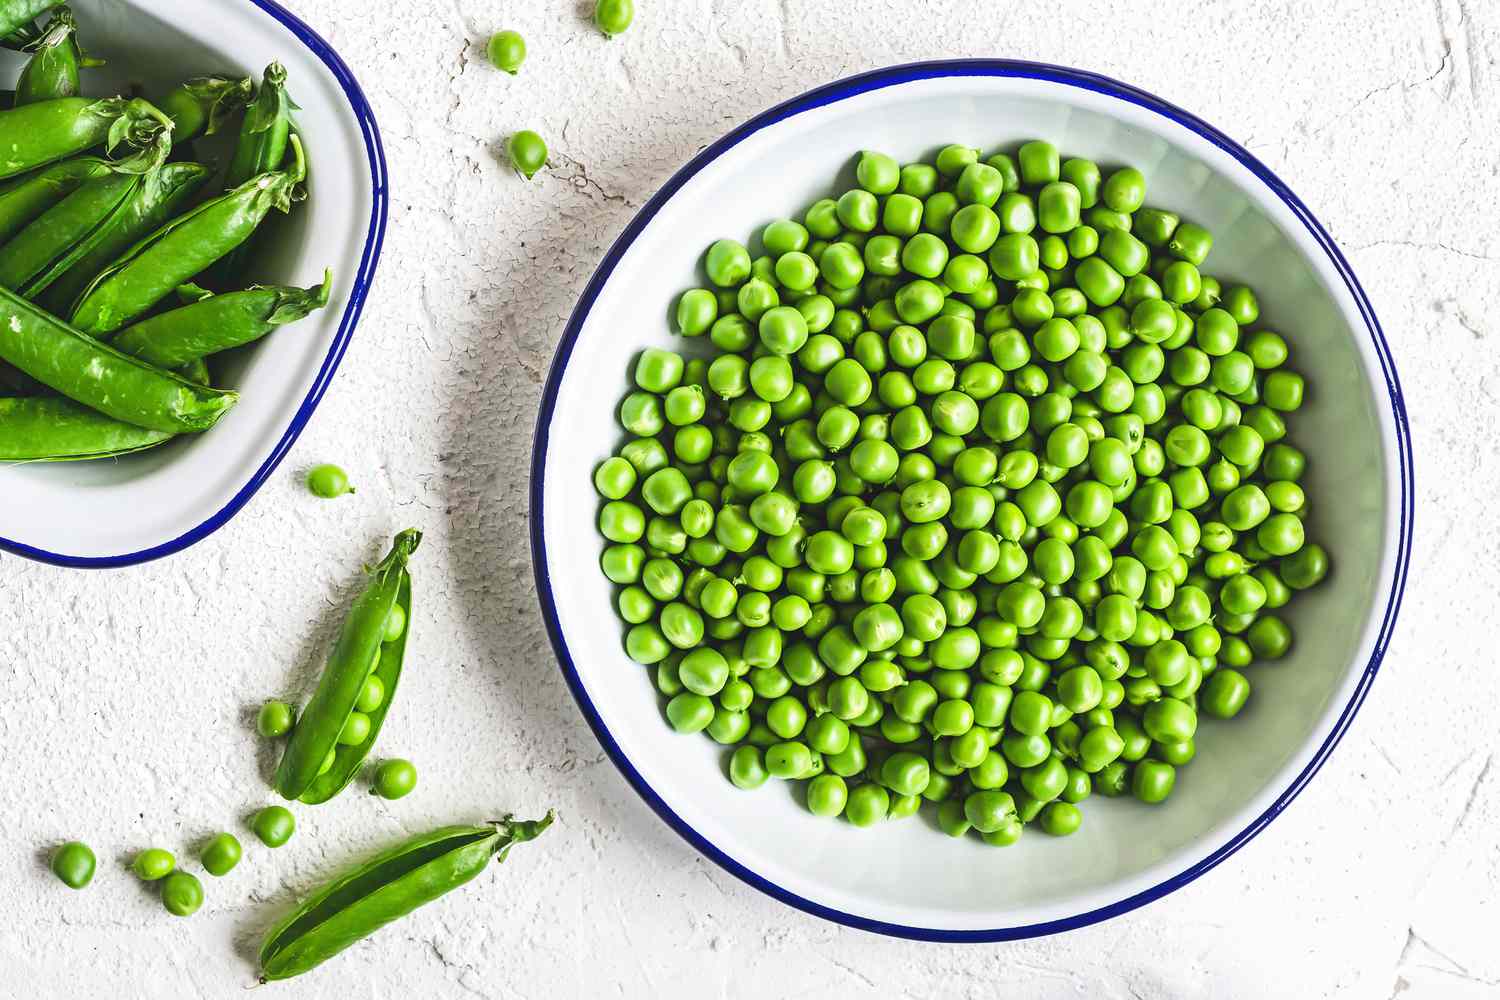 How To Store Snow Peas